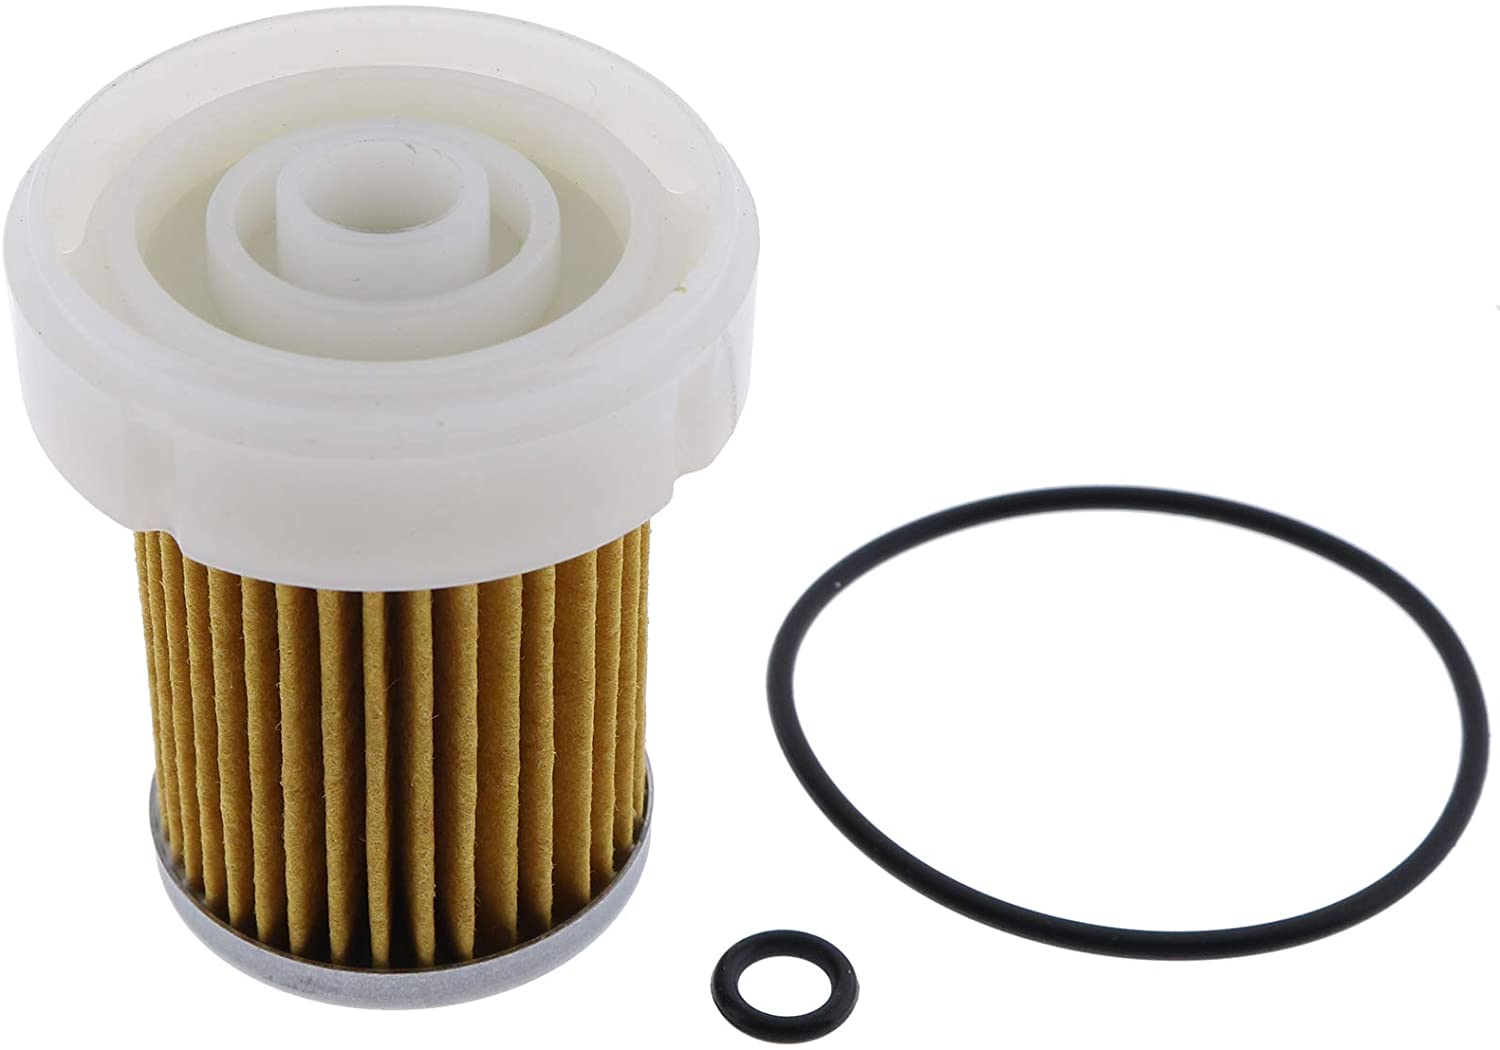 Fuel Filter 6A320-59930 PF9911 31A62-00317 with O Rings 6A320-59950 6A320-59940 Fit for Kubota B Series, M Series, RTV Series, M Series Models - KUDUPARTS